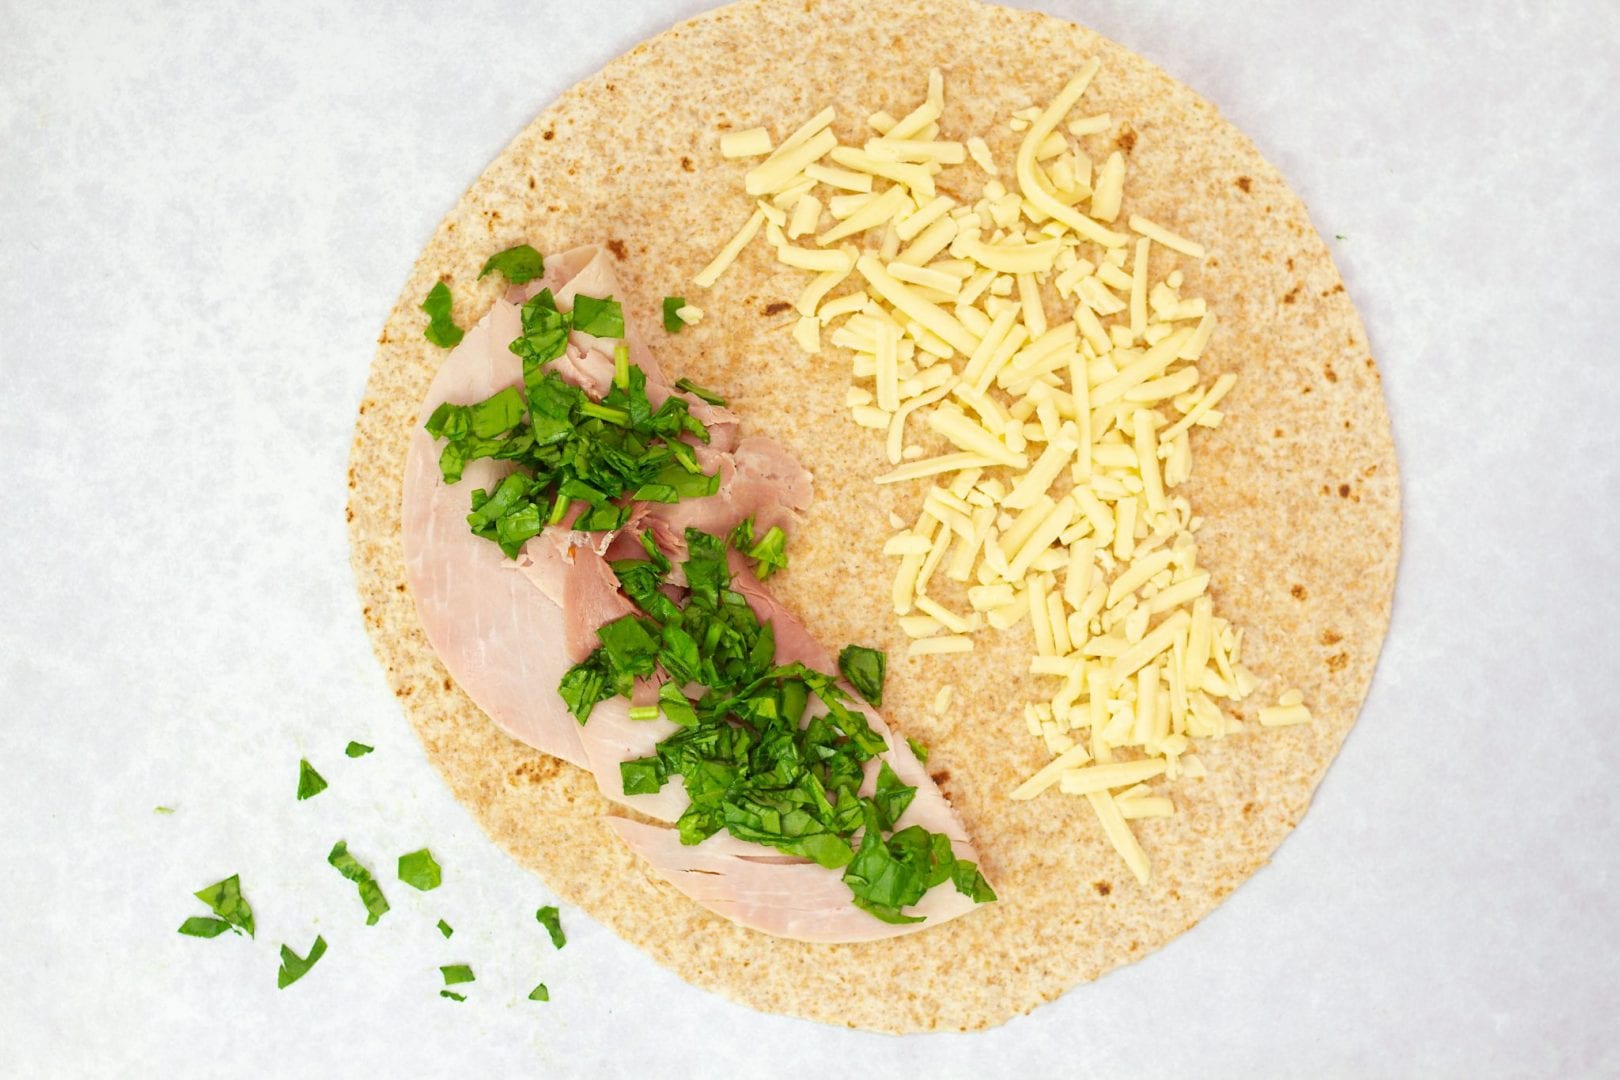 kids quesadillas - ham and cheese quesadilla - packed lunches - lunch box recipes